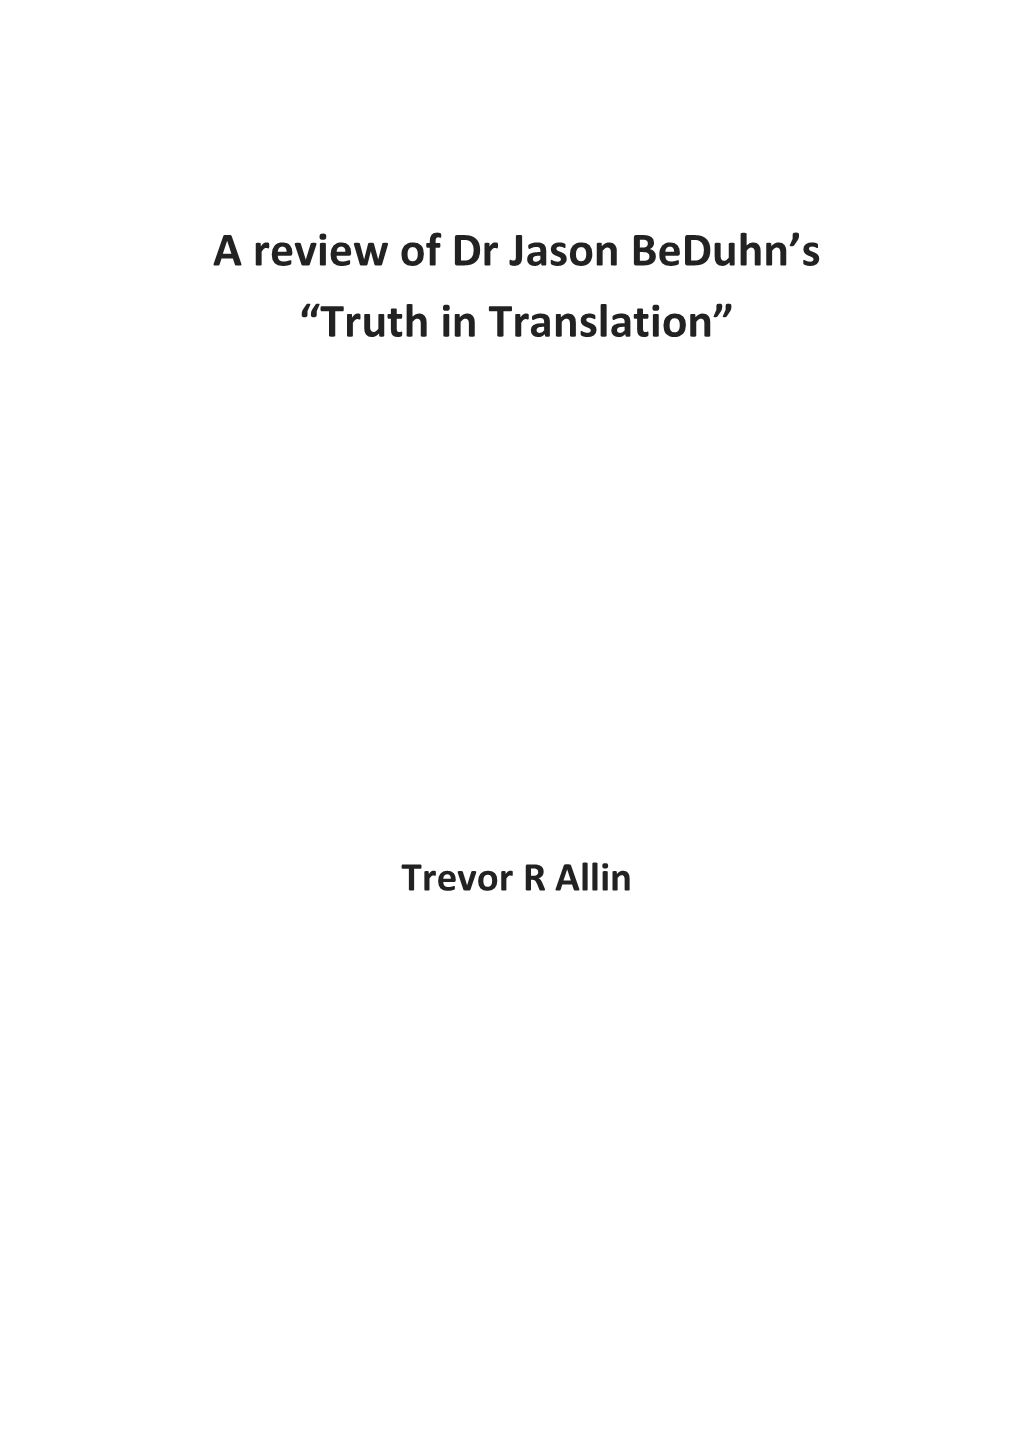 A Review of Dr Jason Beduhn's “Truth in Translation”